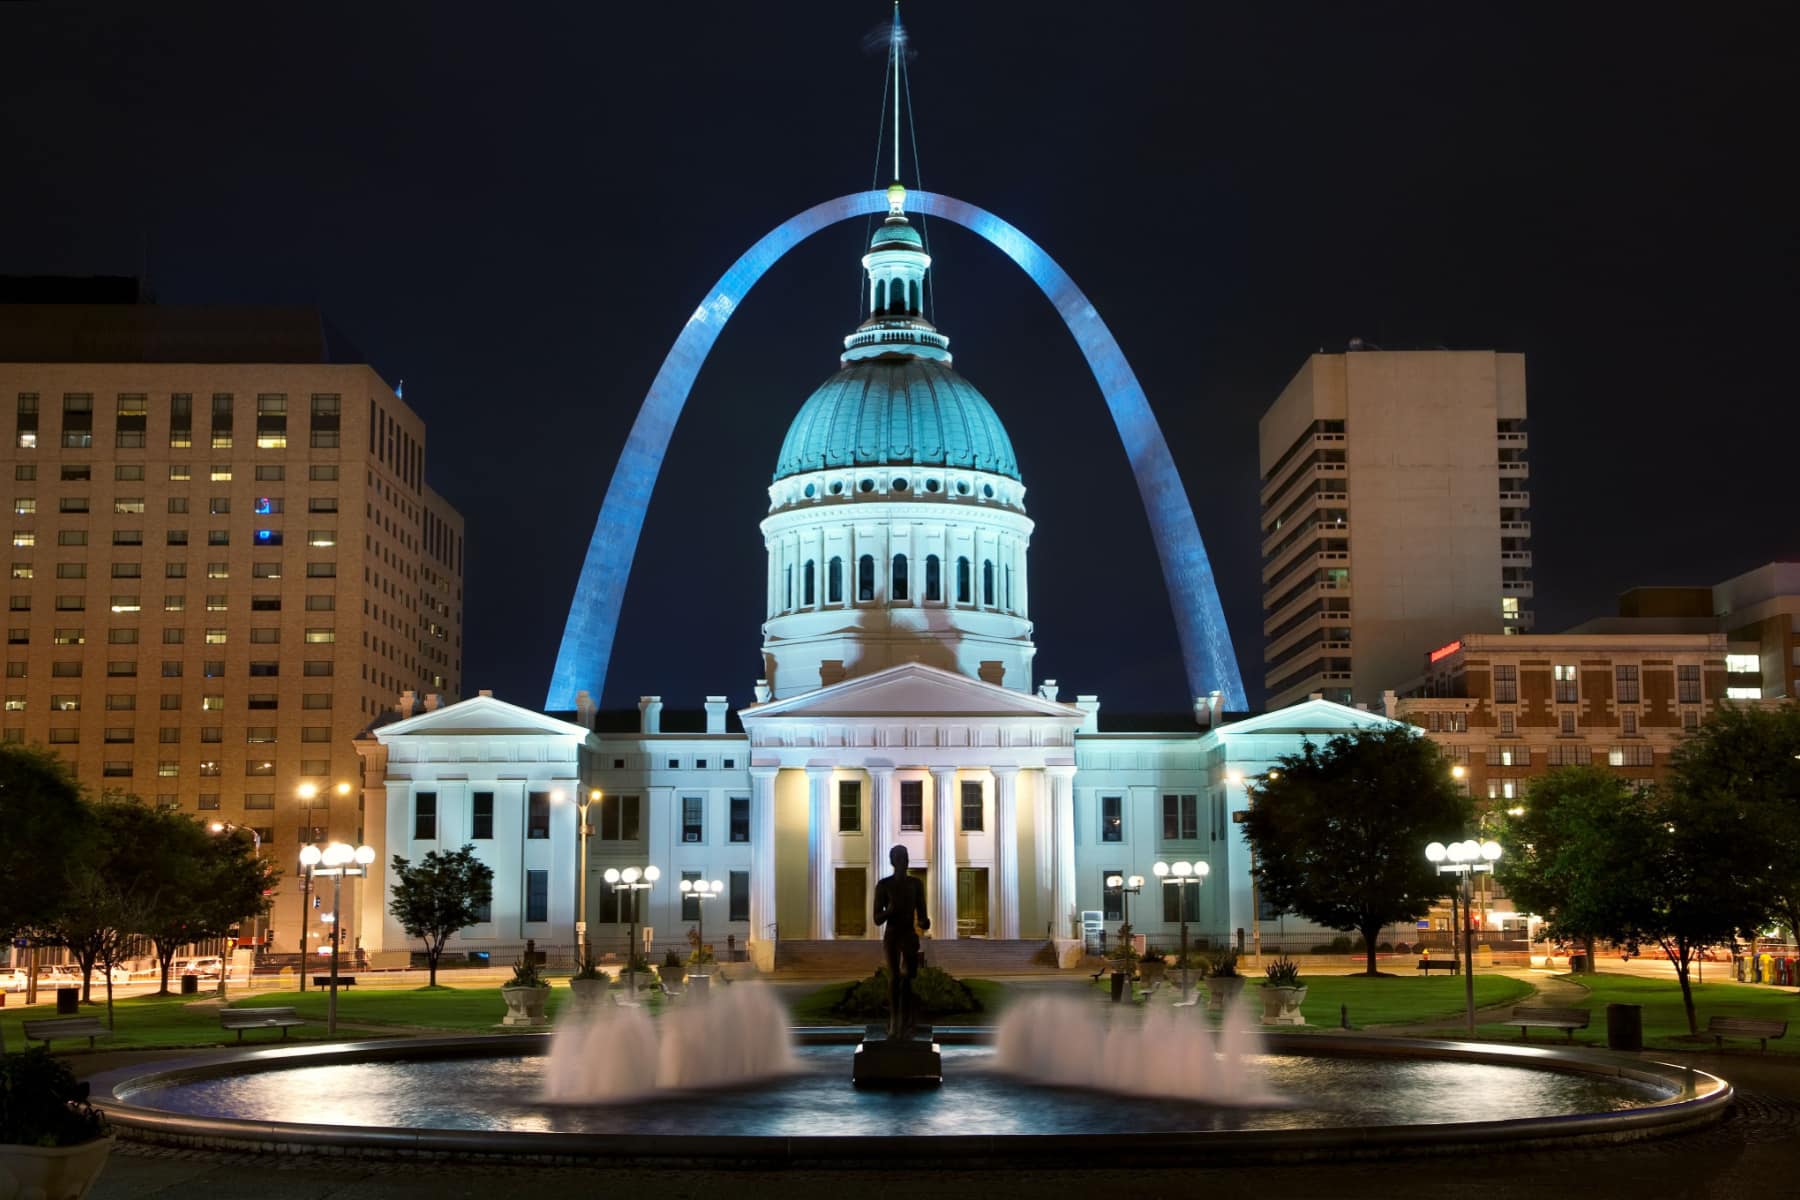 Old Courthouse & Gateway Arch